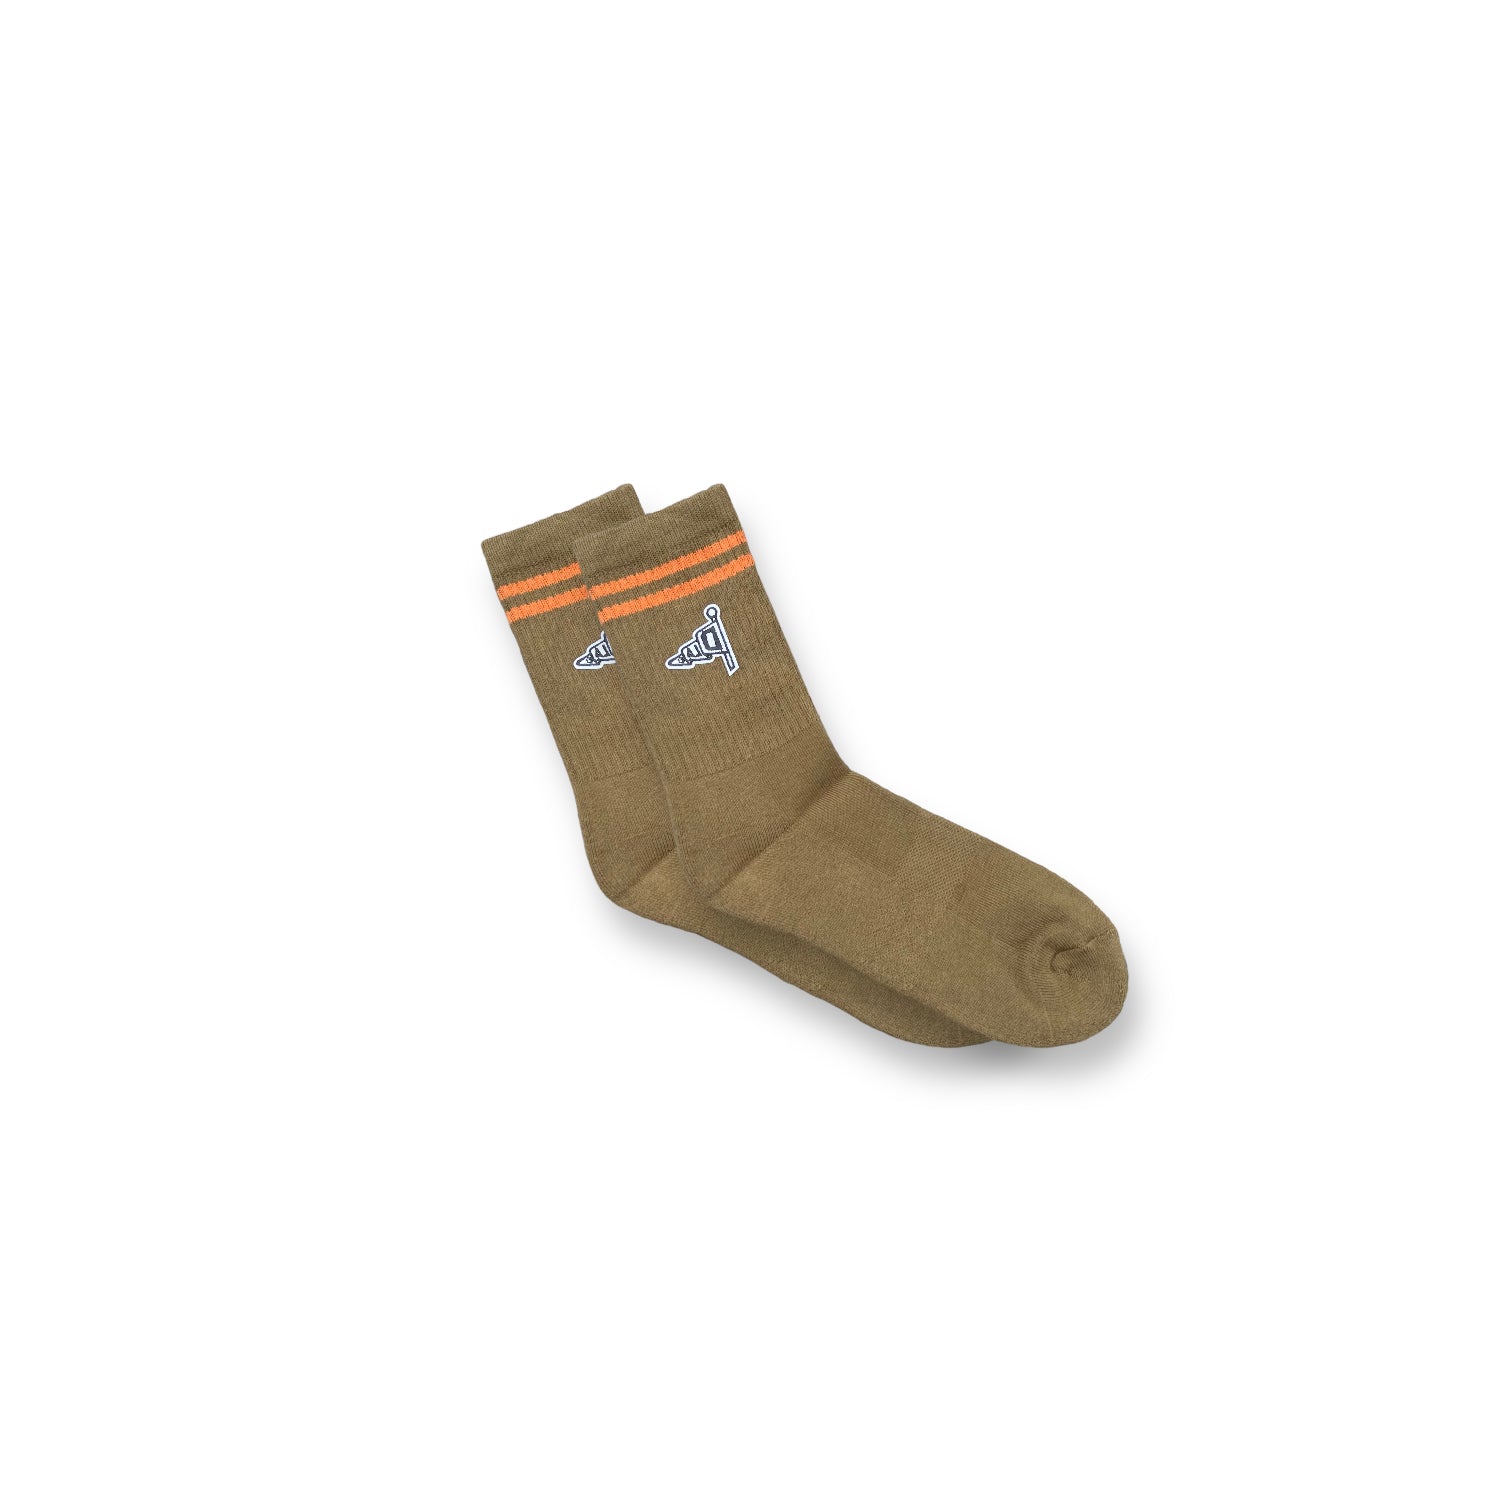 Dlab Socks (High) Green/Orange Lines with Embroidered Patch Color Logo